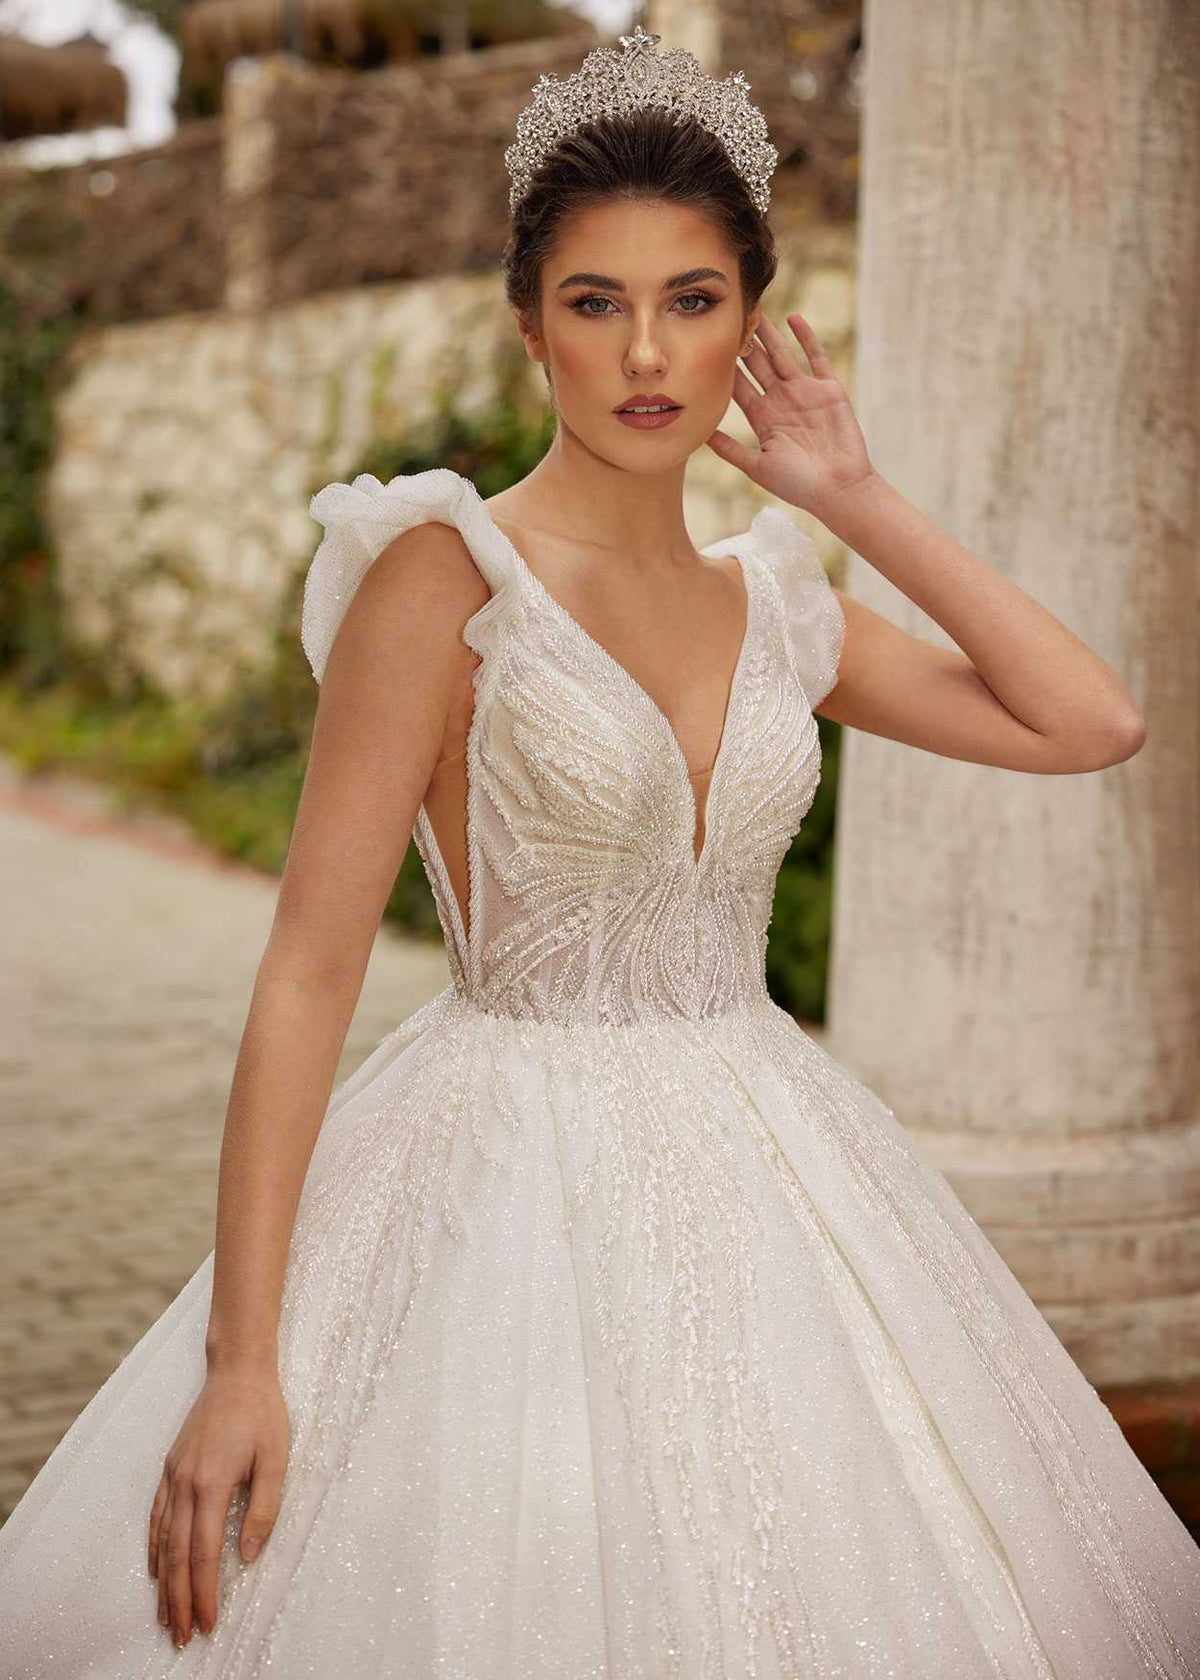 buy Beautiful Ruffled Sleeveless A Line Deep V Neck Wedding Dress With Pearls plus size online wedding gowns store